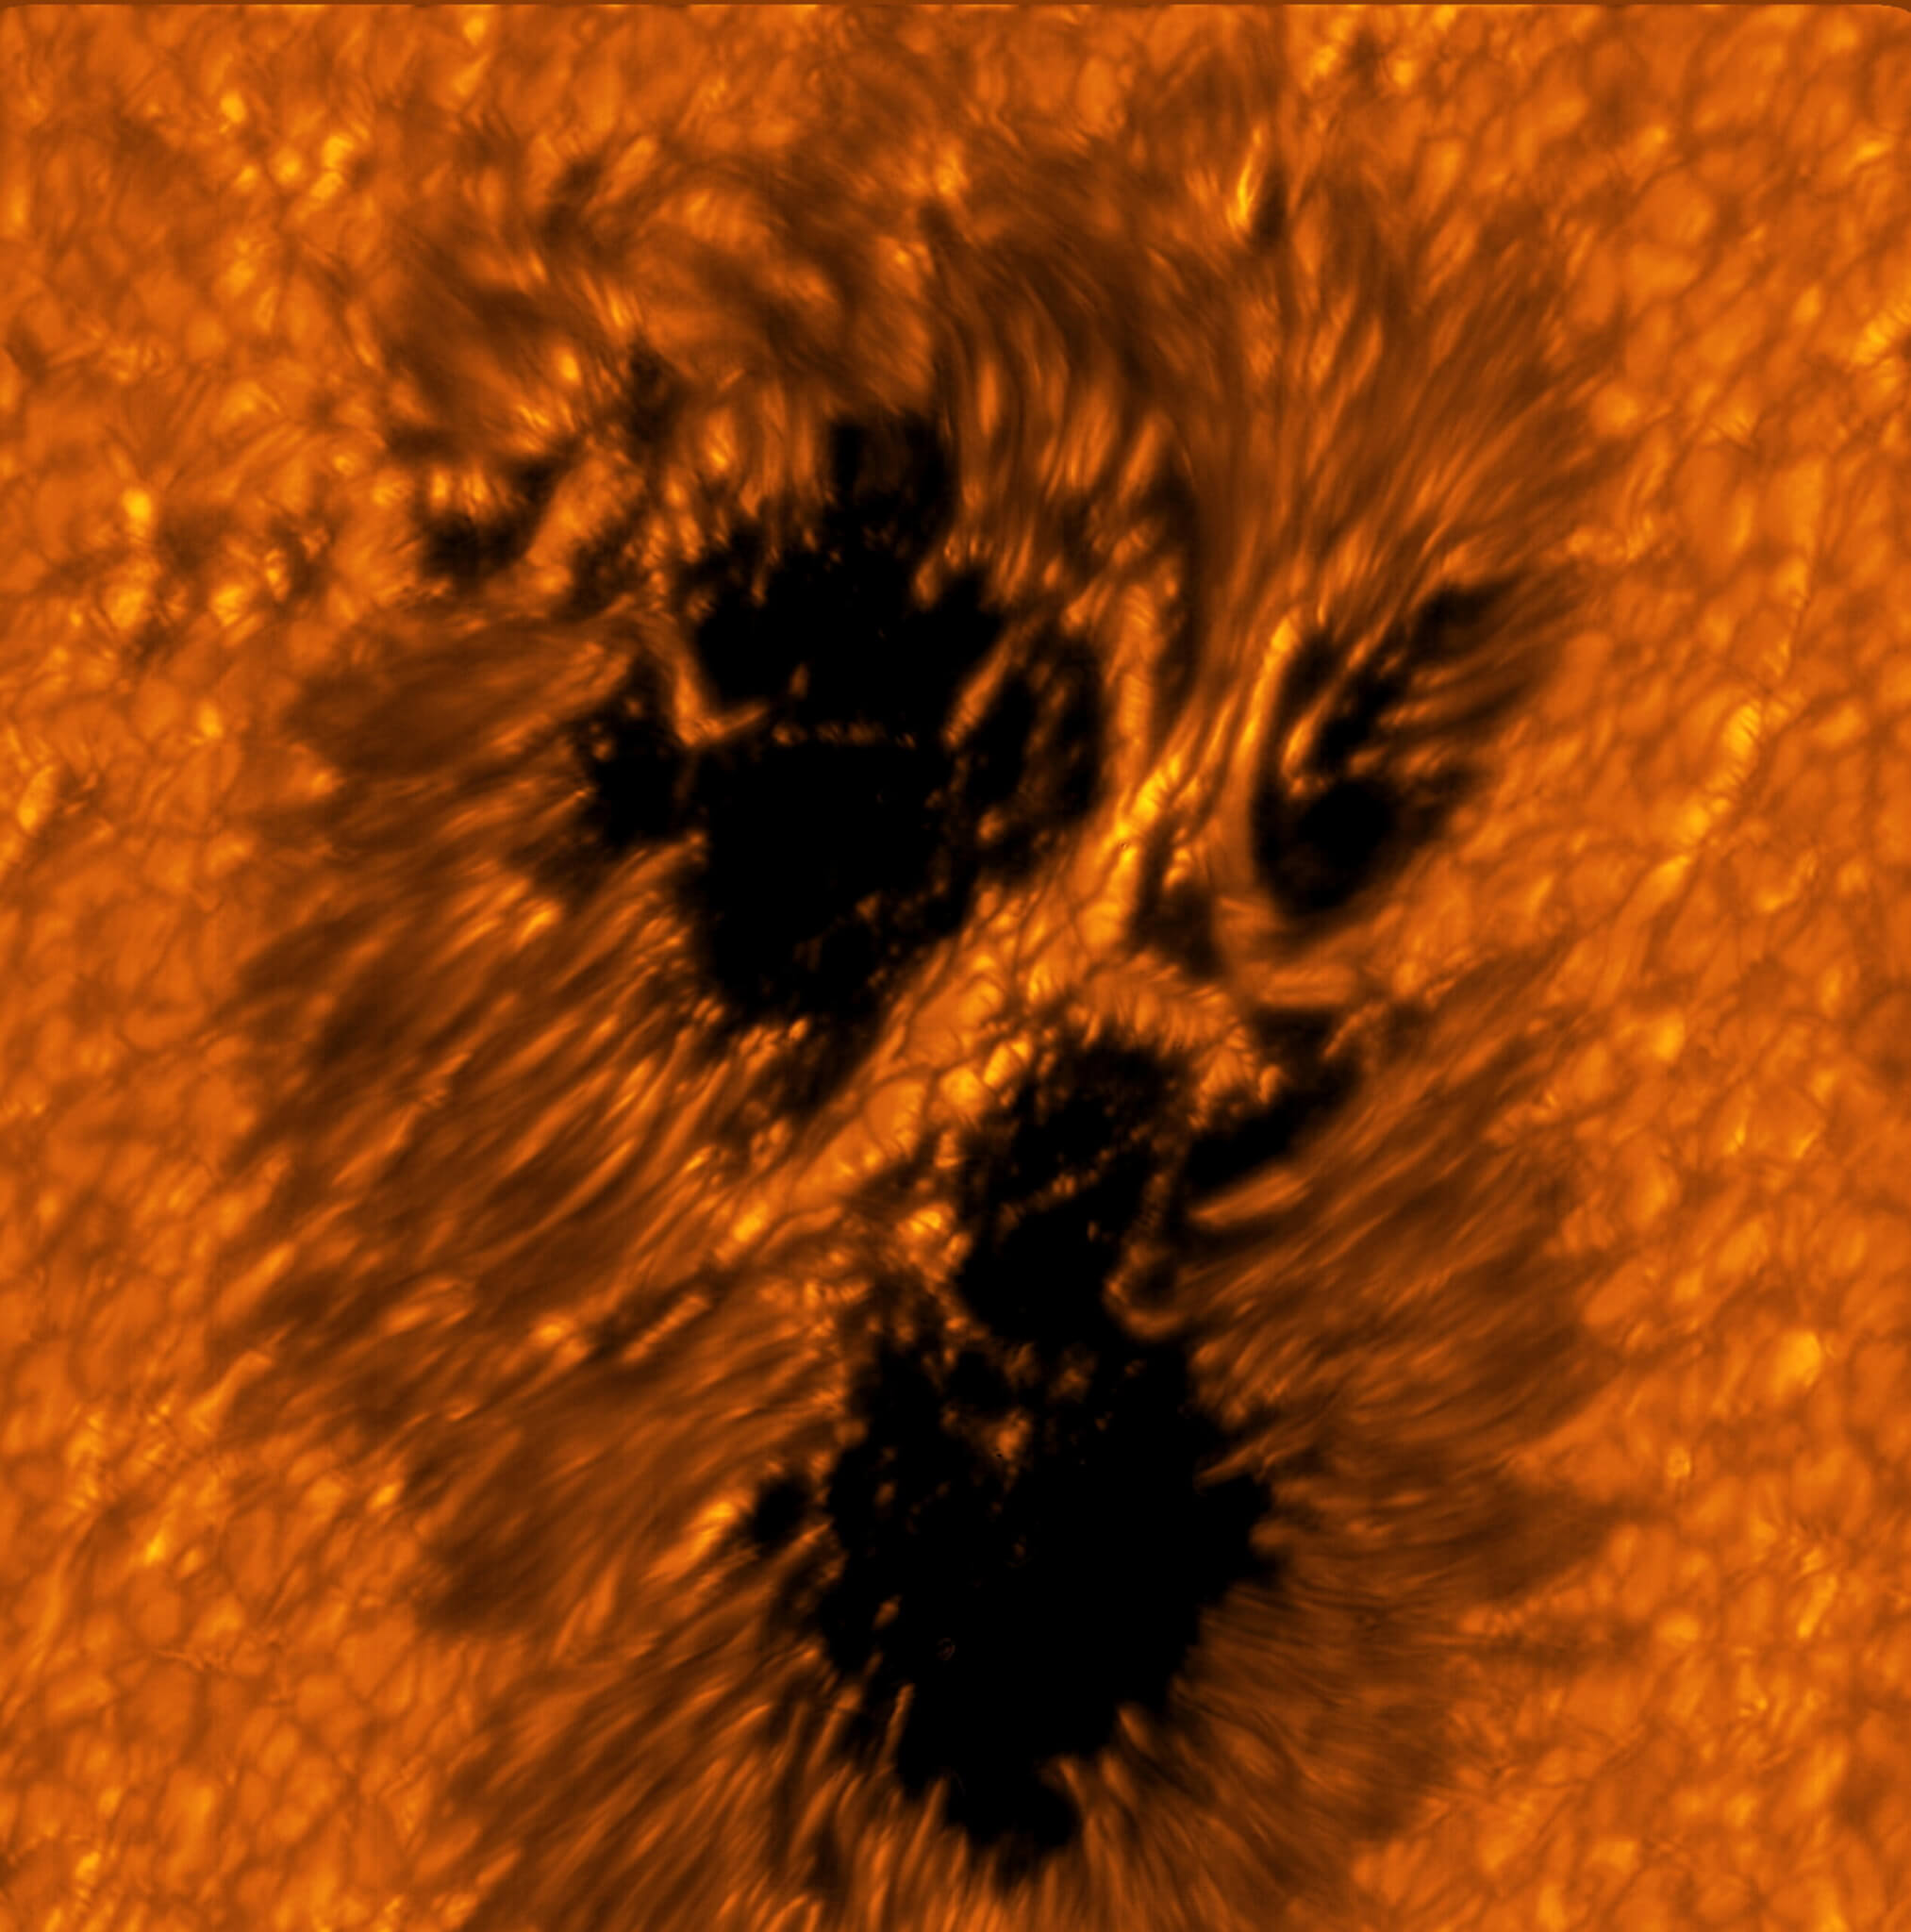 A light bridge is seen crossing a sunspot’s umbra from one end of the penumbra to the other